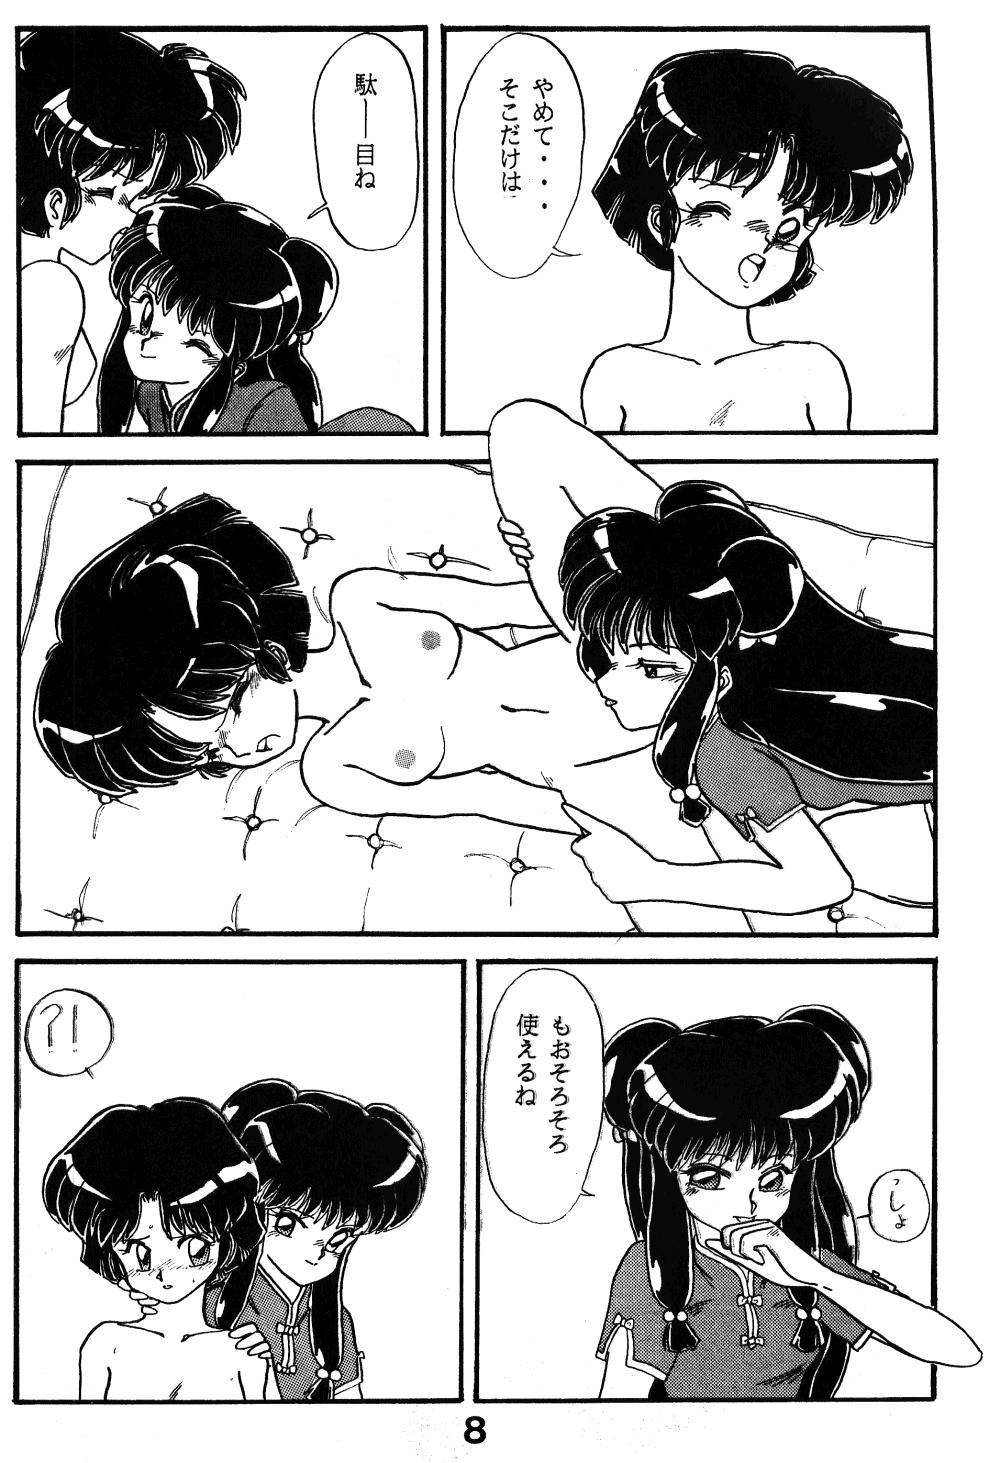 Hardcorend Mute Play - Ranma 12 Roughsex - Page 7